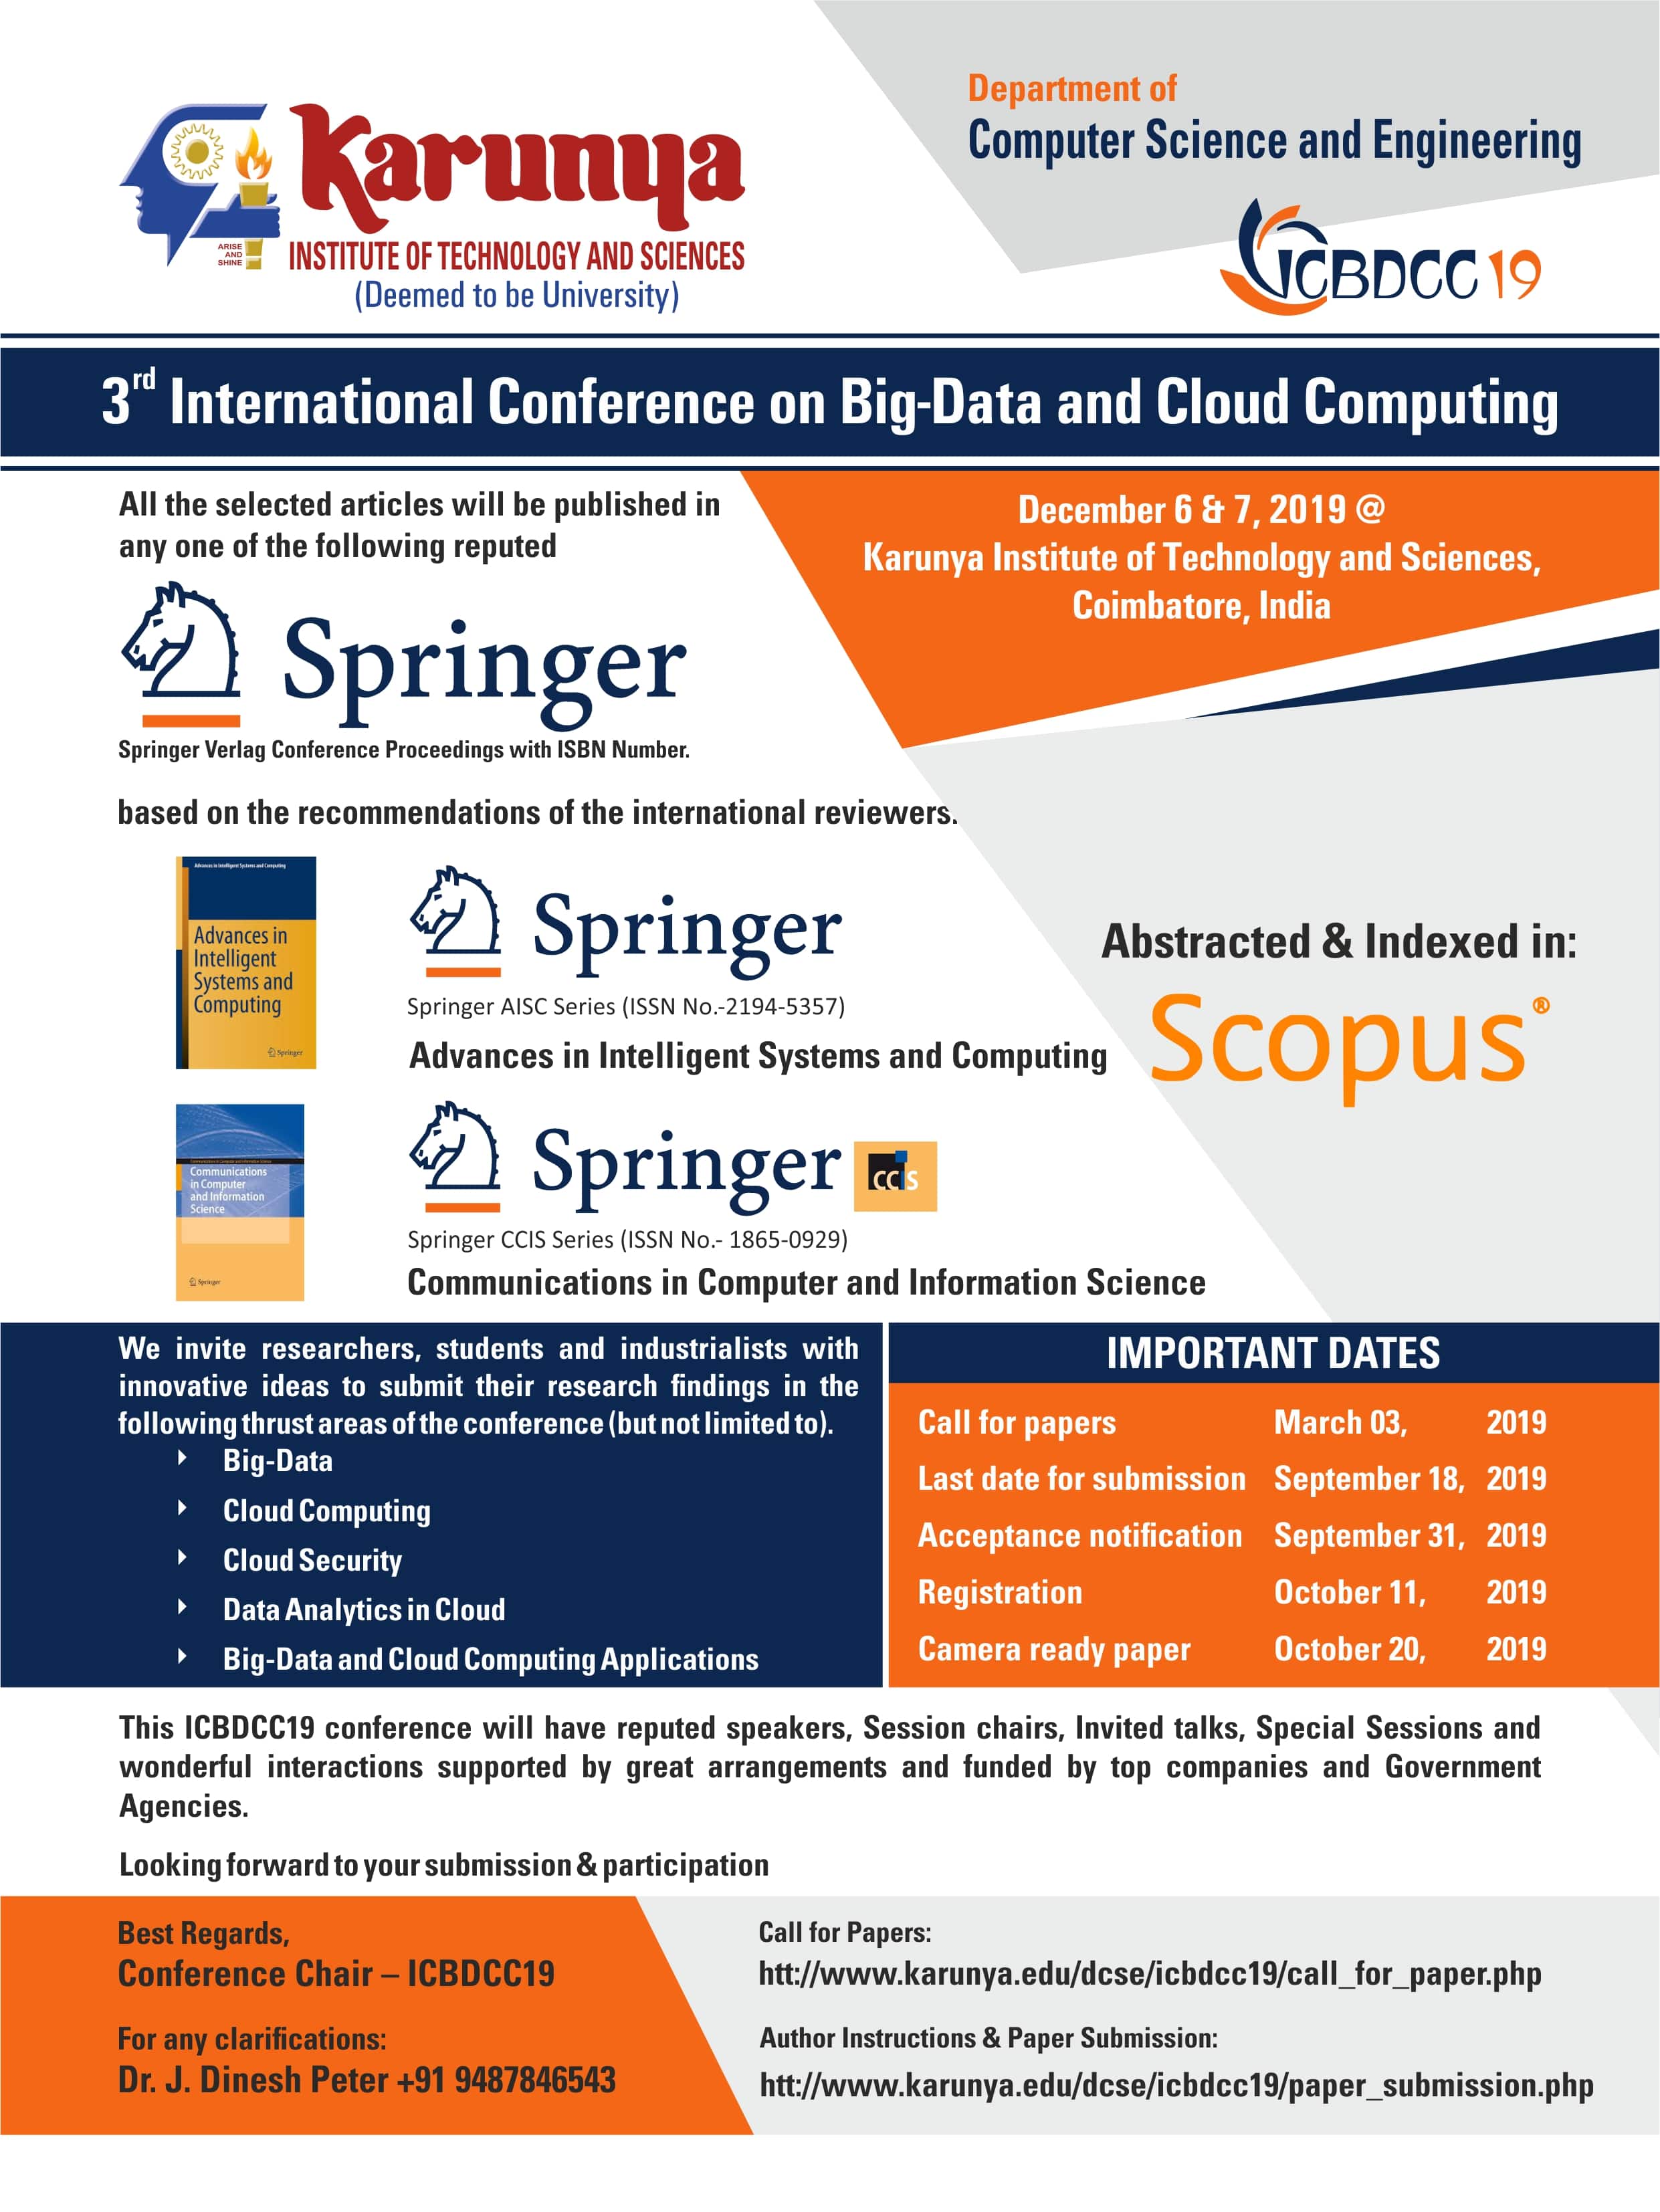 3rd International Conference on Big Data and Cloud Computing ICBDCC 2019